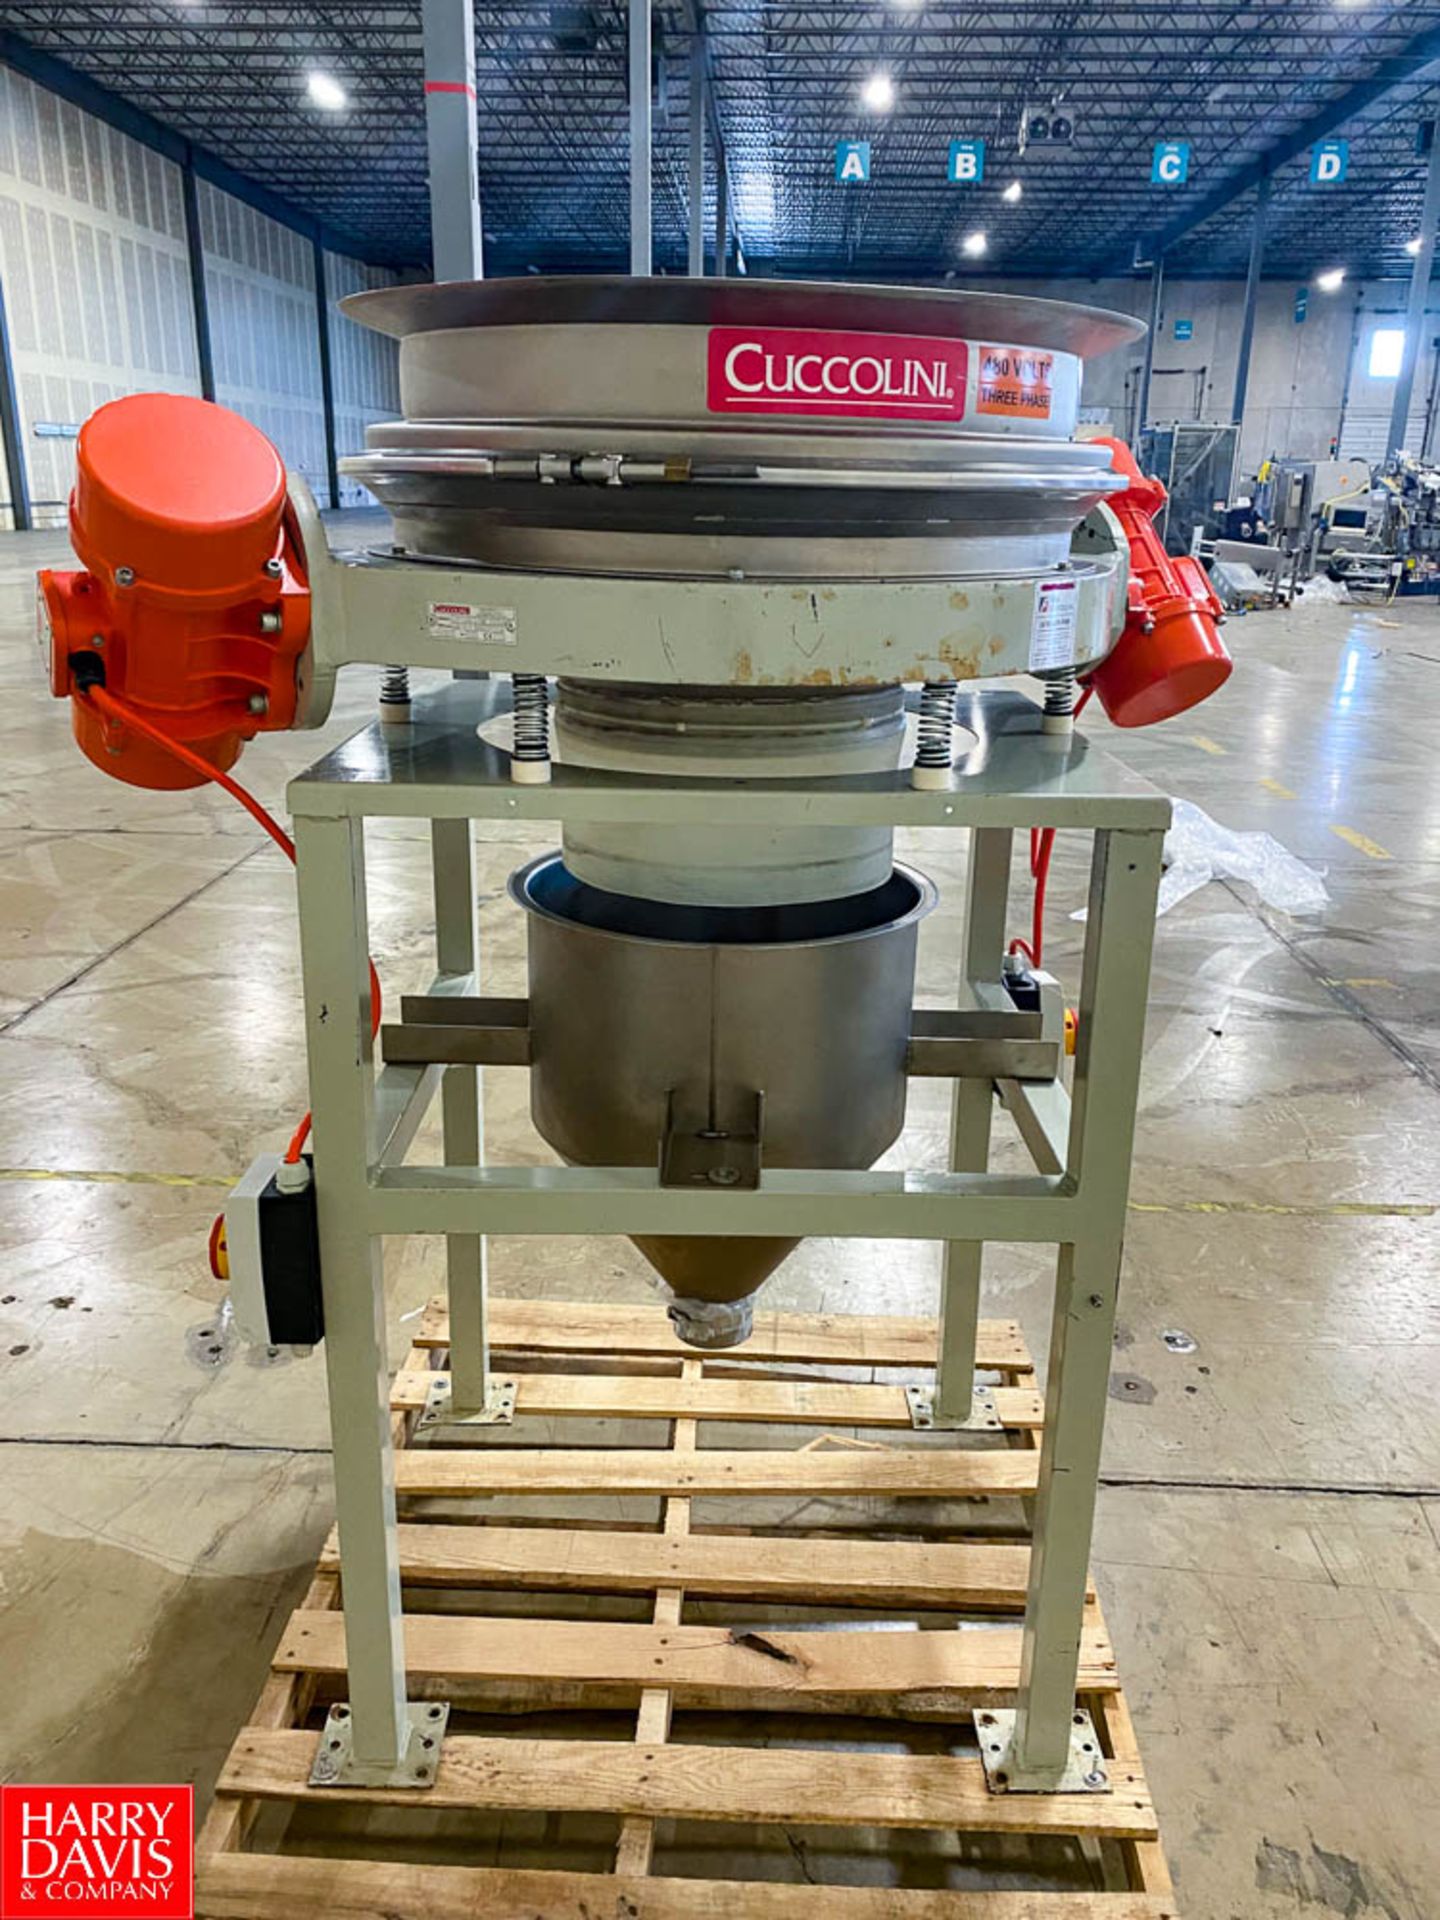 Cuccolini S/S Vibratory Sifter, Model: VP2800 1X, with (2) Motors, Stand and Feed Funnel - Riggers